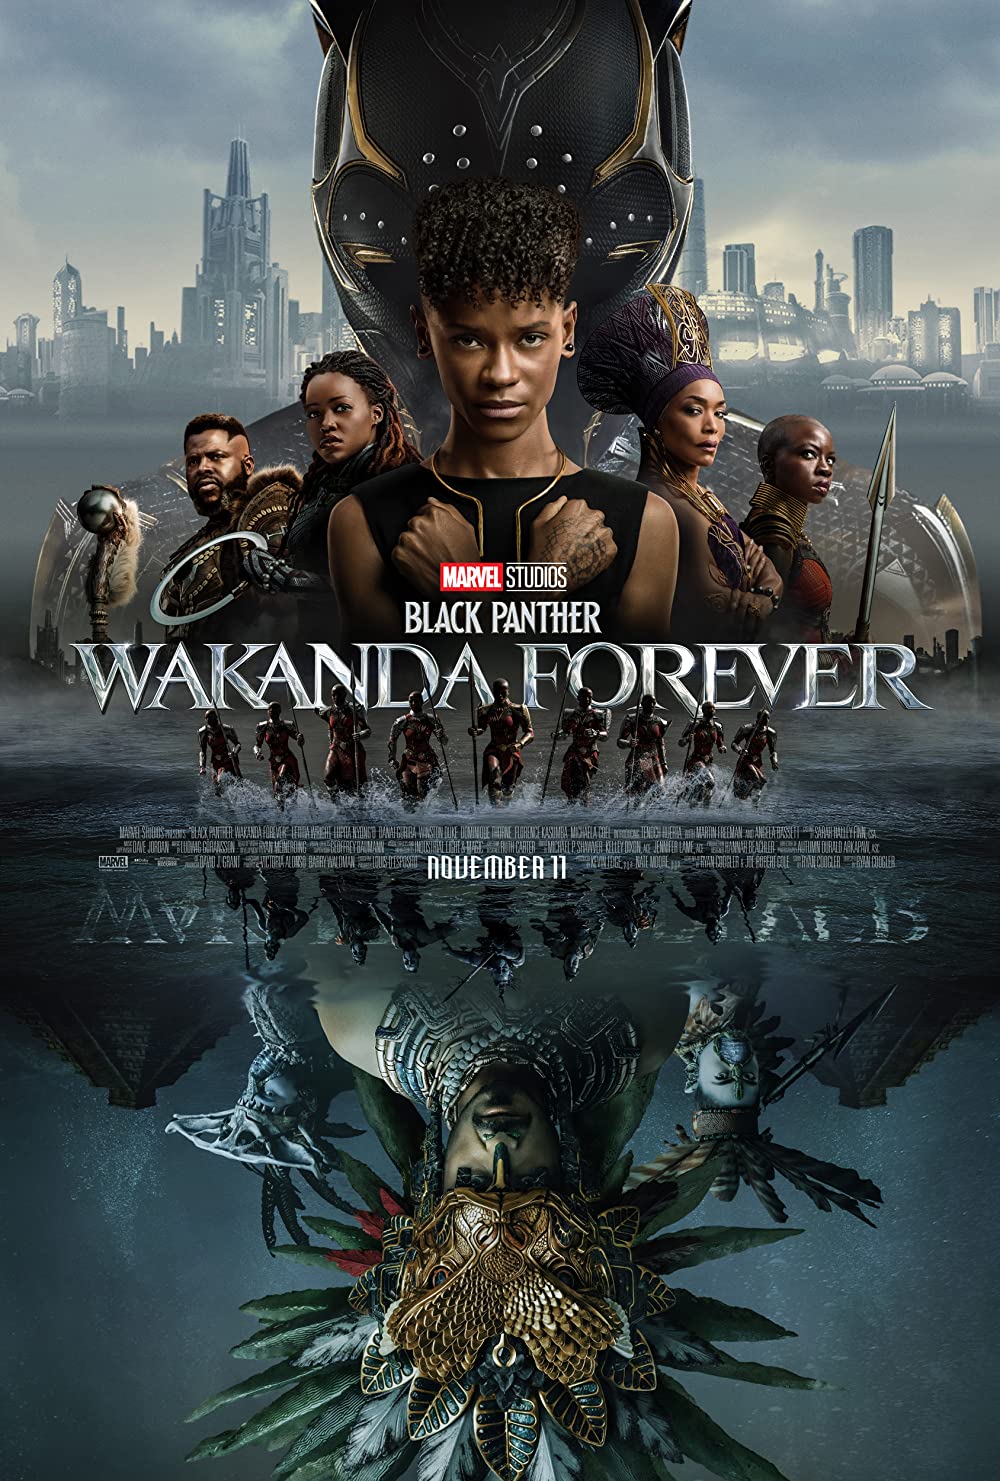 Black Panther: Wakanda Forever is the sequel of the first movie, Black Panther released in 2018.